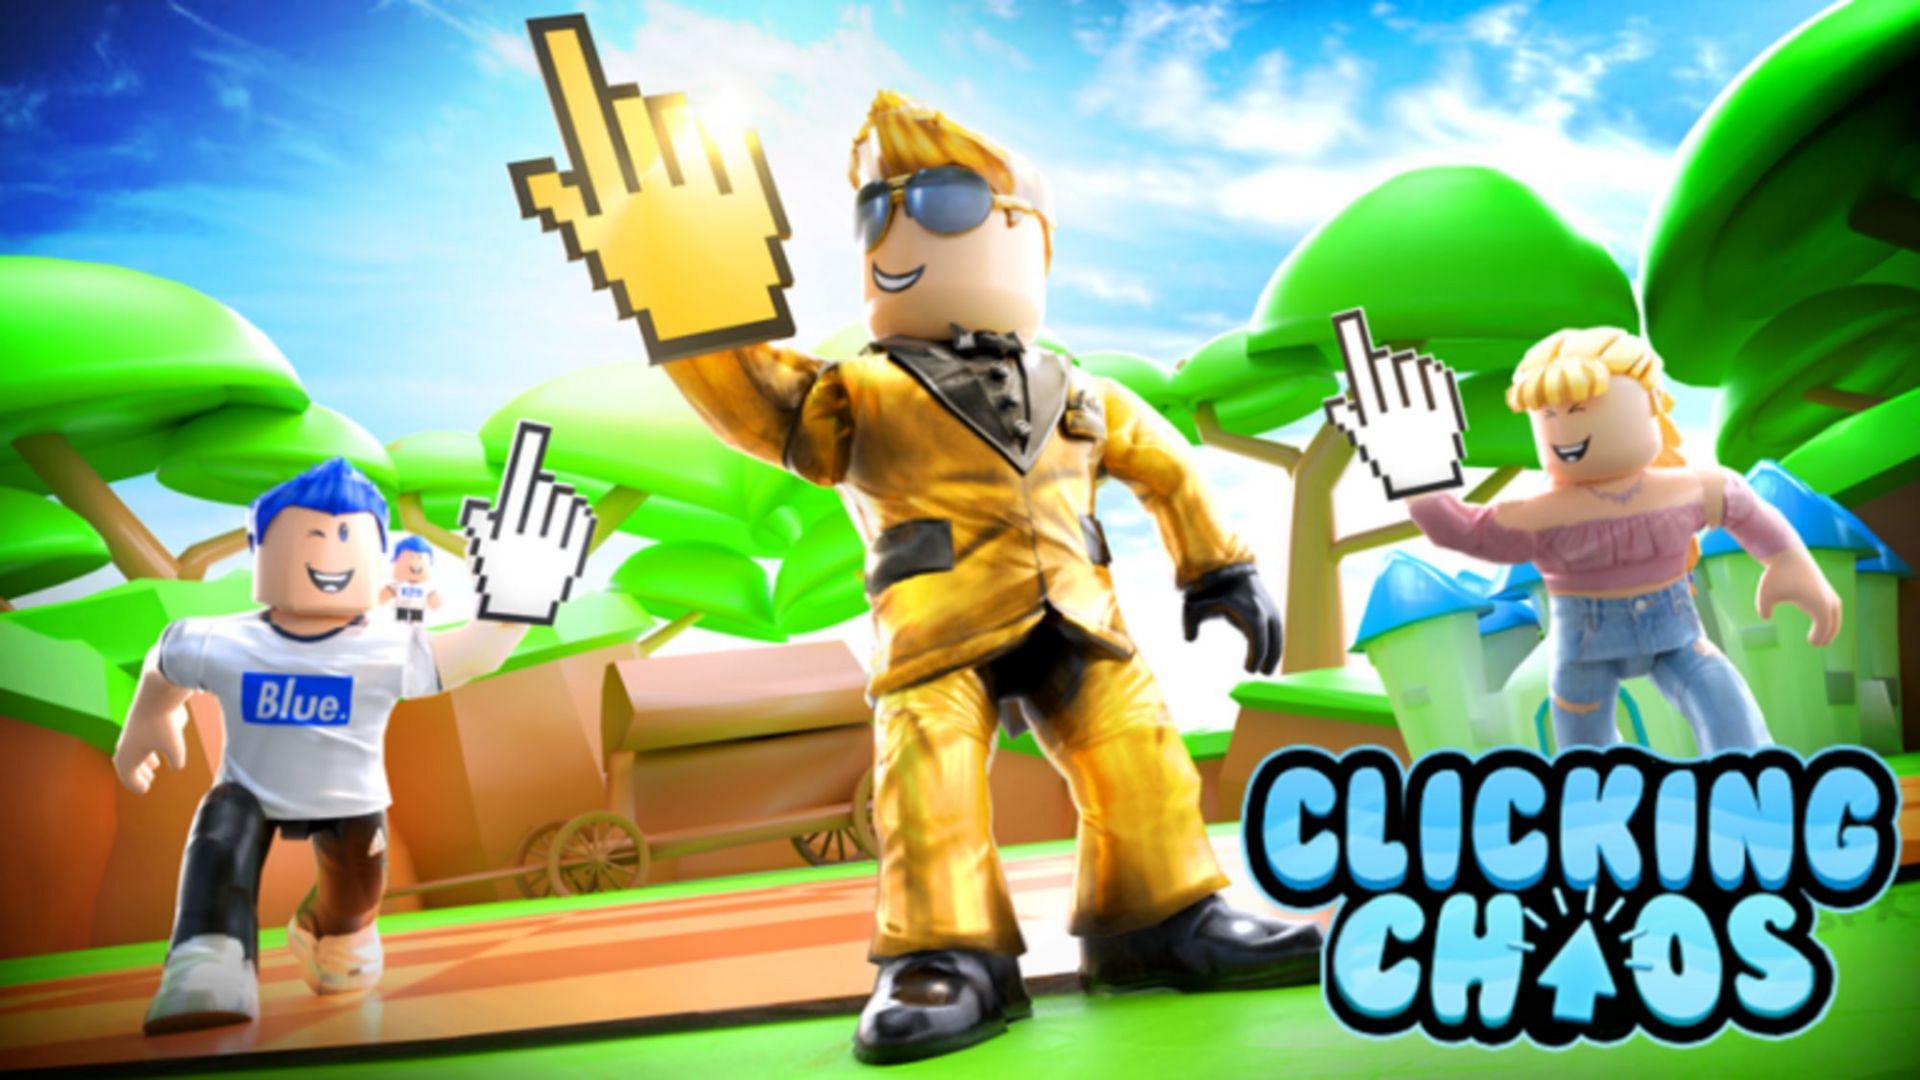 Keep clicking and earn several in-game badges in Chaos Clickers (Image via Roblox)